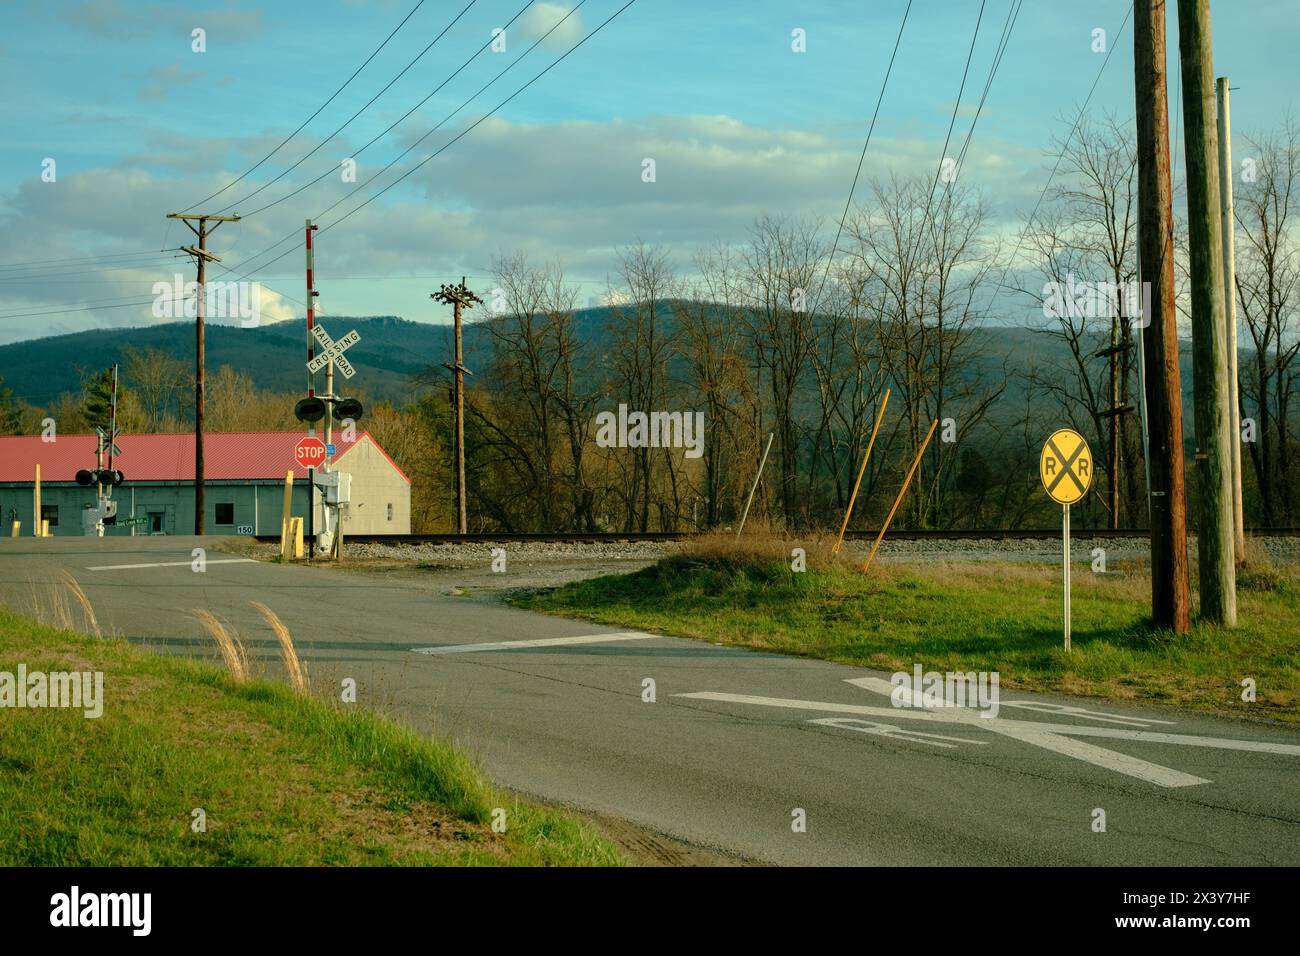 A railroad crossing in Wytheville, Virginia Stock Photo